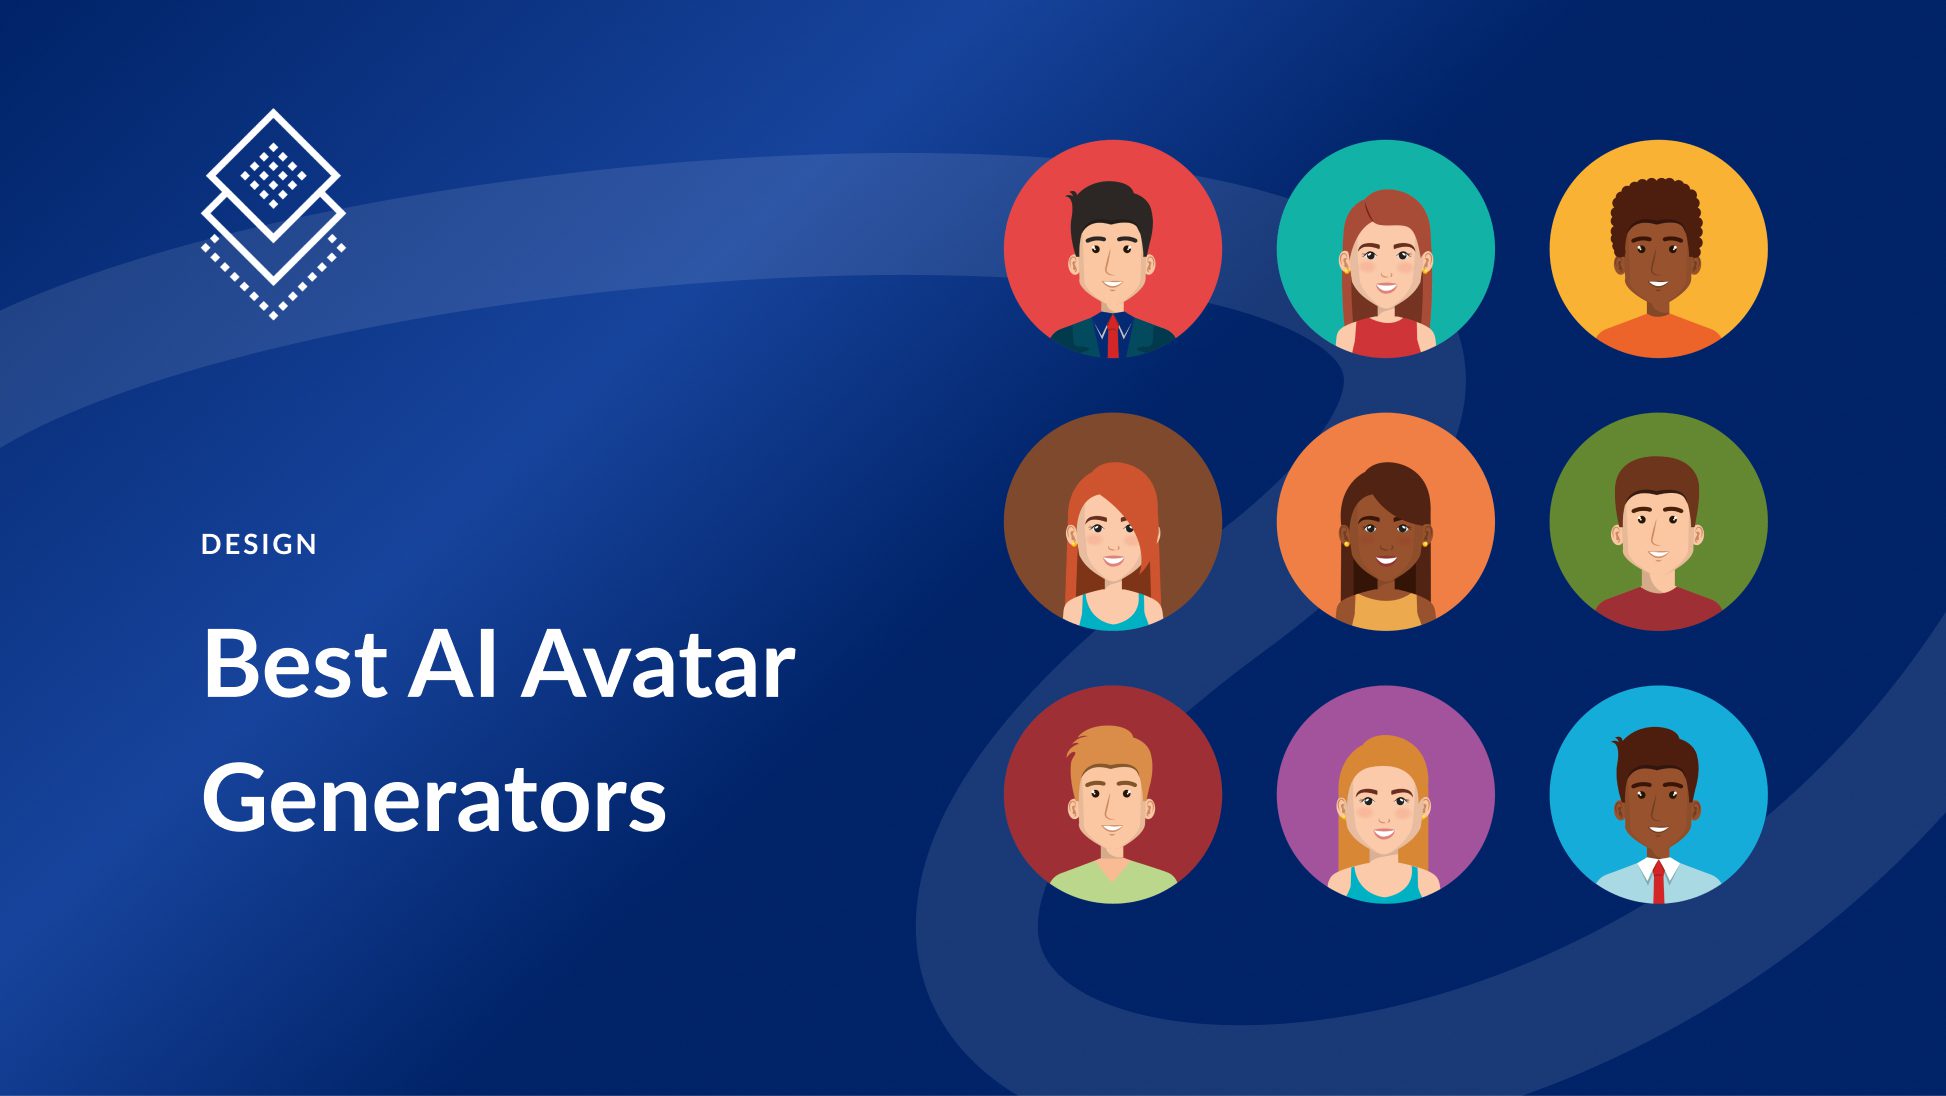 ATTENTION! To put in the avatar codes you have to use the game